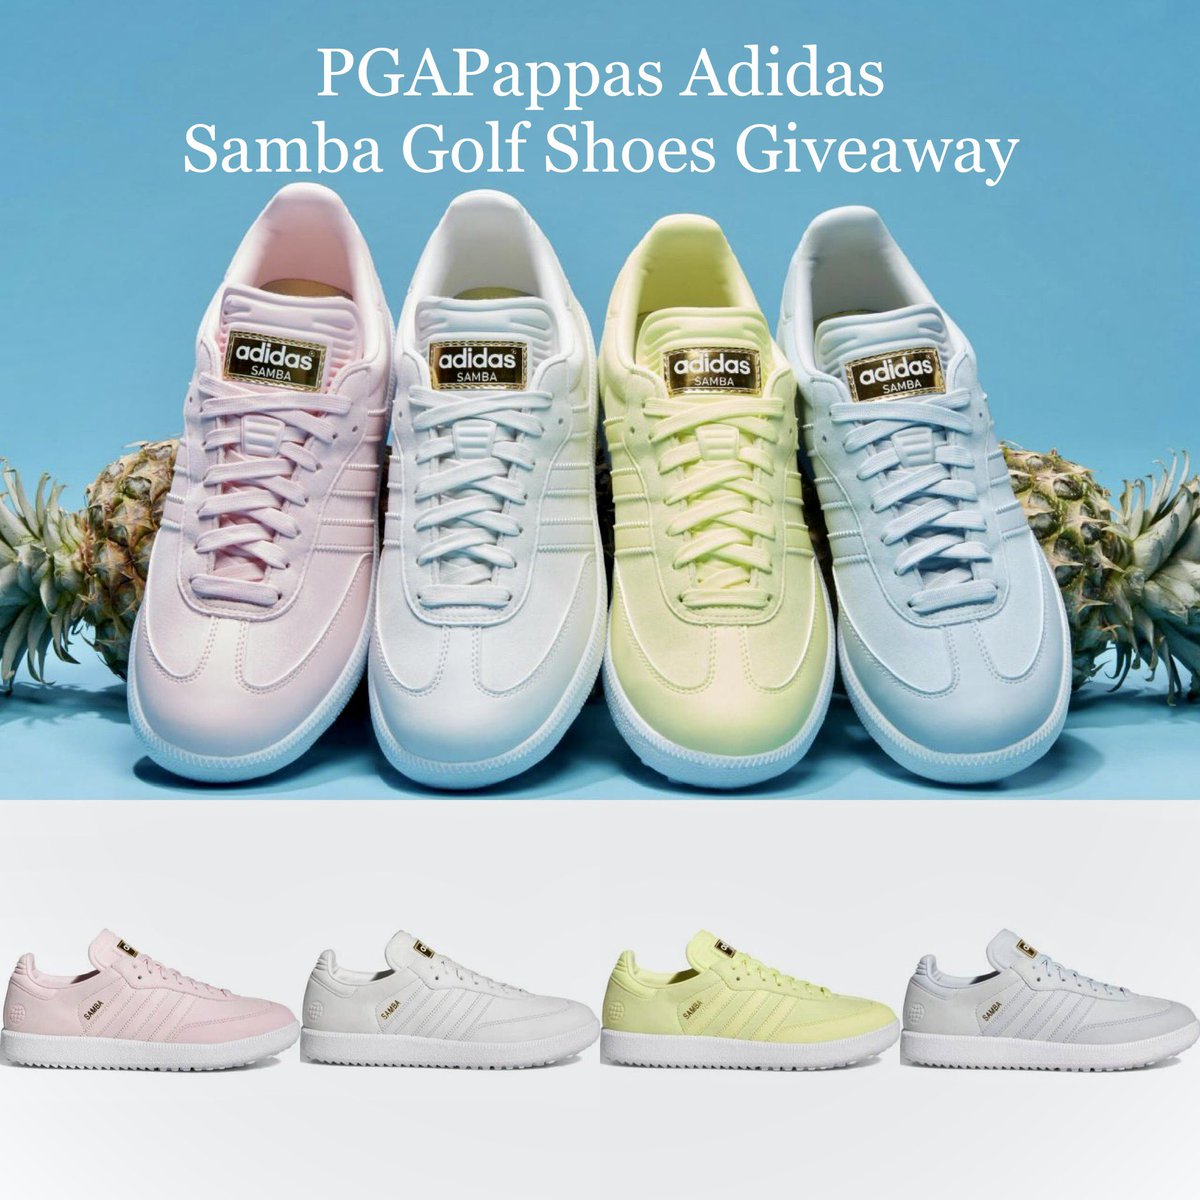 🚨 PGAPappas Adidas Samba Golf Shoes GIVEAWAY 🚨 🔥 New 2022 Limited Edition Adidas Samba Golf Shoes (choose any size and pink, white, yellow, or blue color) 👀 To enter: ✅ Retweet ✅ Follow @PGAPappas and @adidasGolf